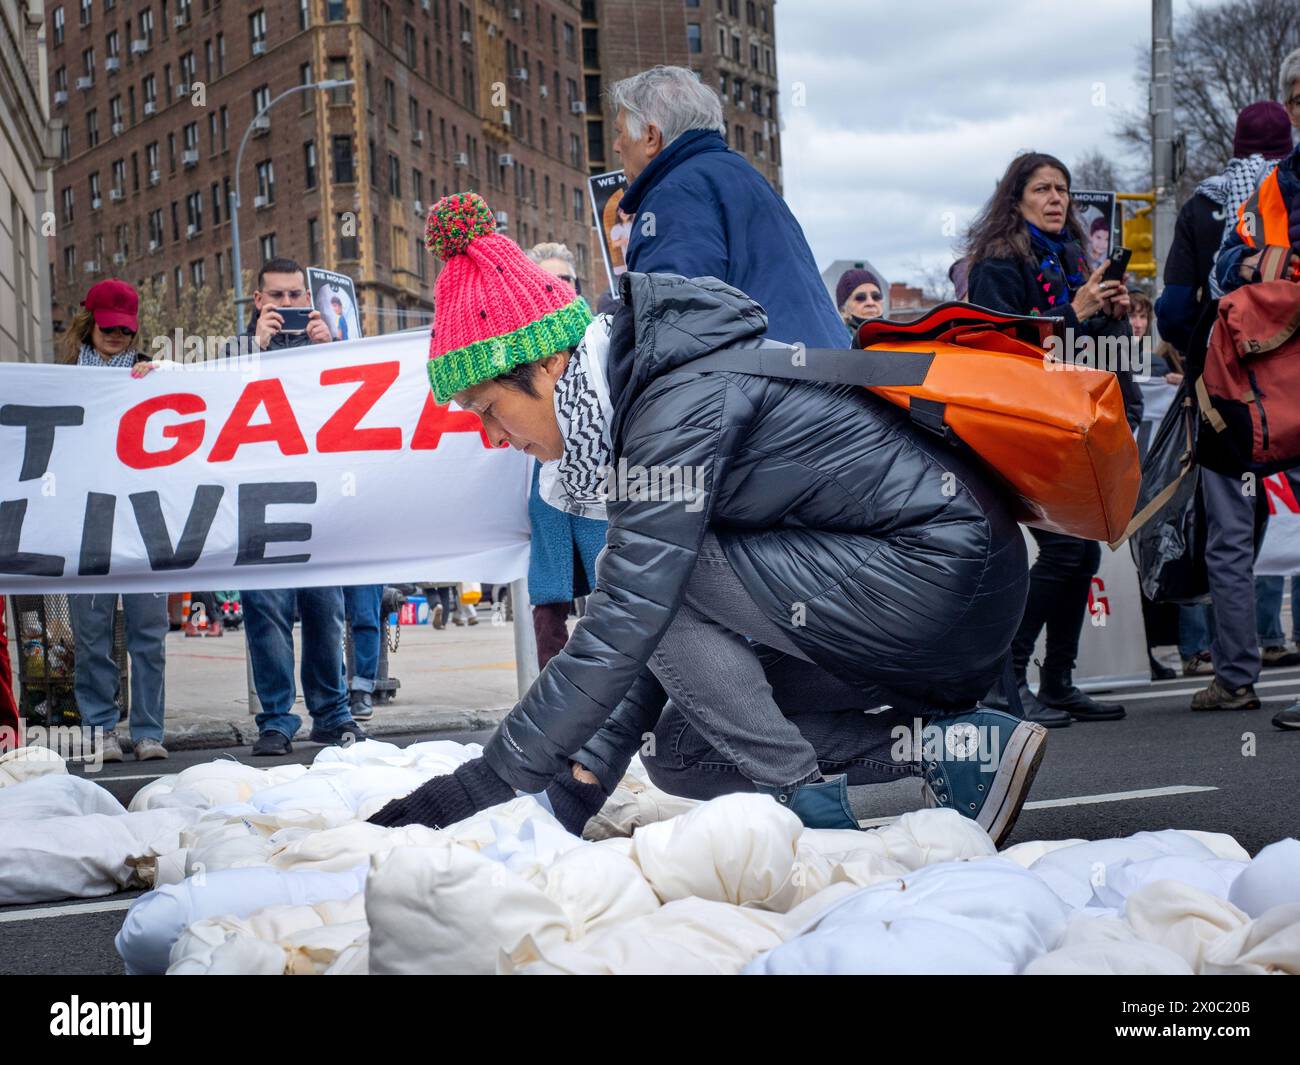 April 6, 2024, Brooklyn, United States: A protester lays down a simulation of a child's dead body during a Pro-Palestine demonstration. Protesters gather at Grand Army Plaza in Brooklyn to protest the killing of children in Gaza. They joined the Jewish Elders & Friends for Ceasefire, a part of Jewish Voice for Peace. The focus was on urging Senator Schumer to cease arming genocide with the tagline ''We demand action, not empty words.'' The route went through the farmerâ€™s market to highlight the famine's impact on Palestinian children. Plans to march to Senator Schumerâ€™s home were thwarted Stock Photo